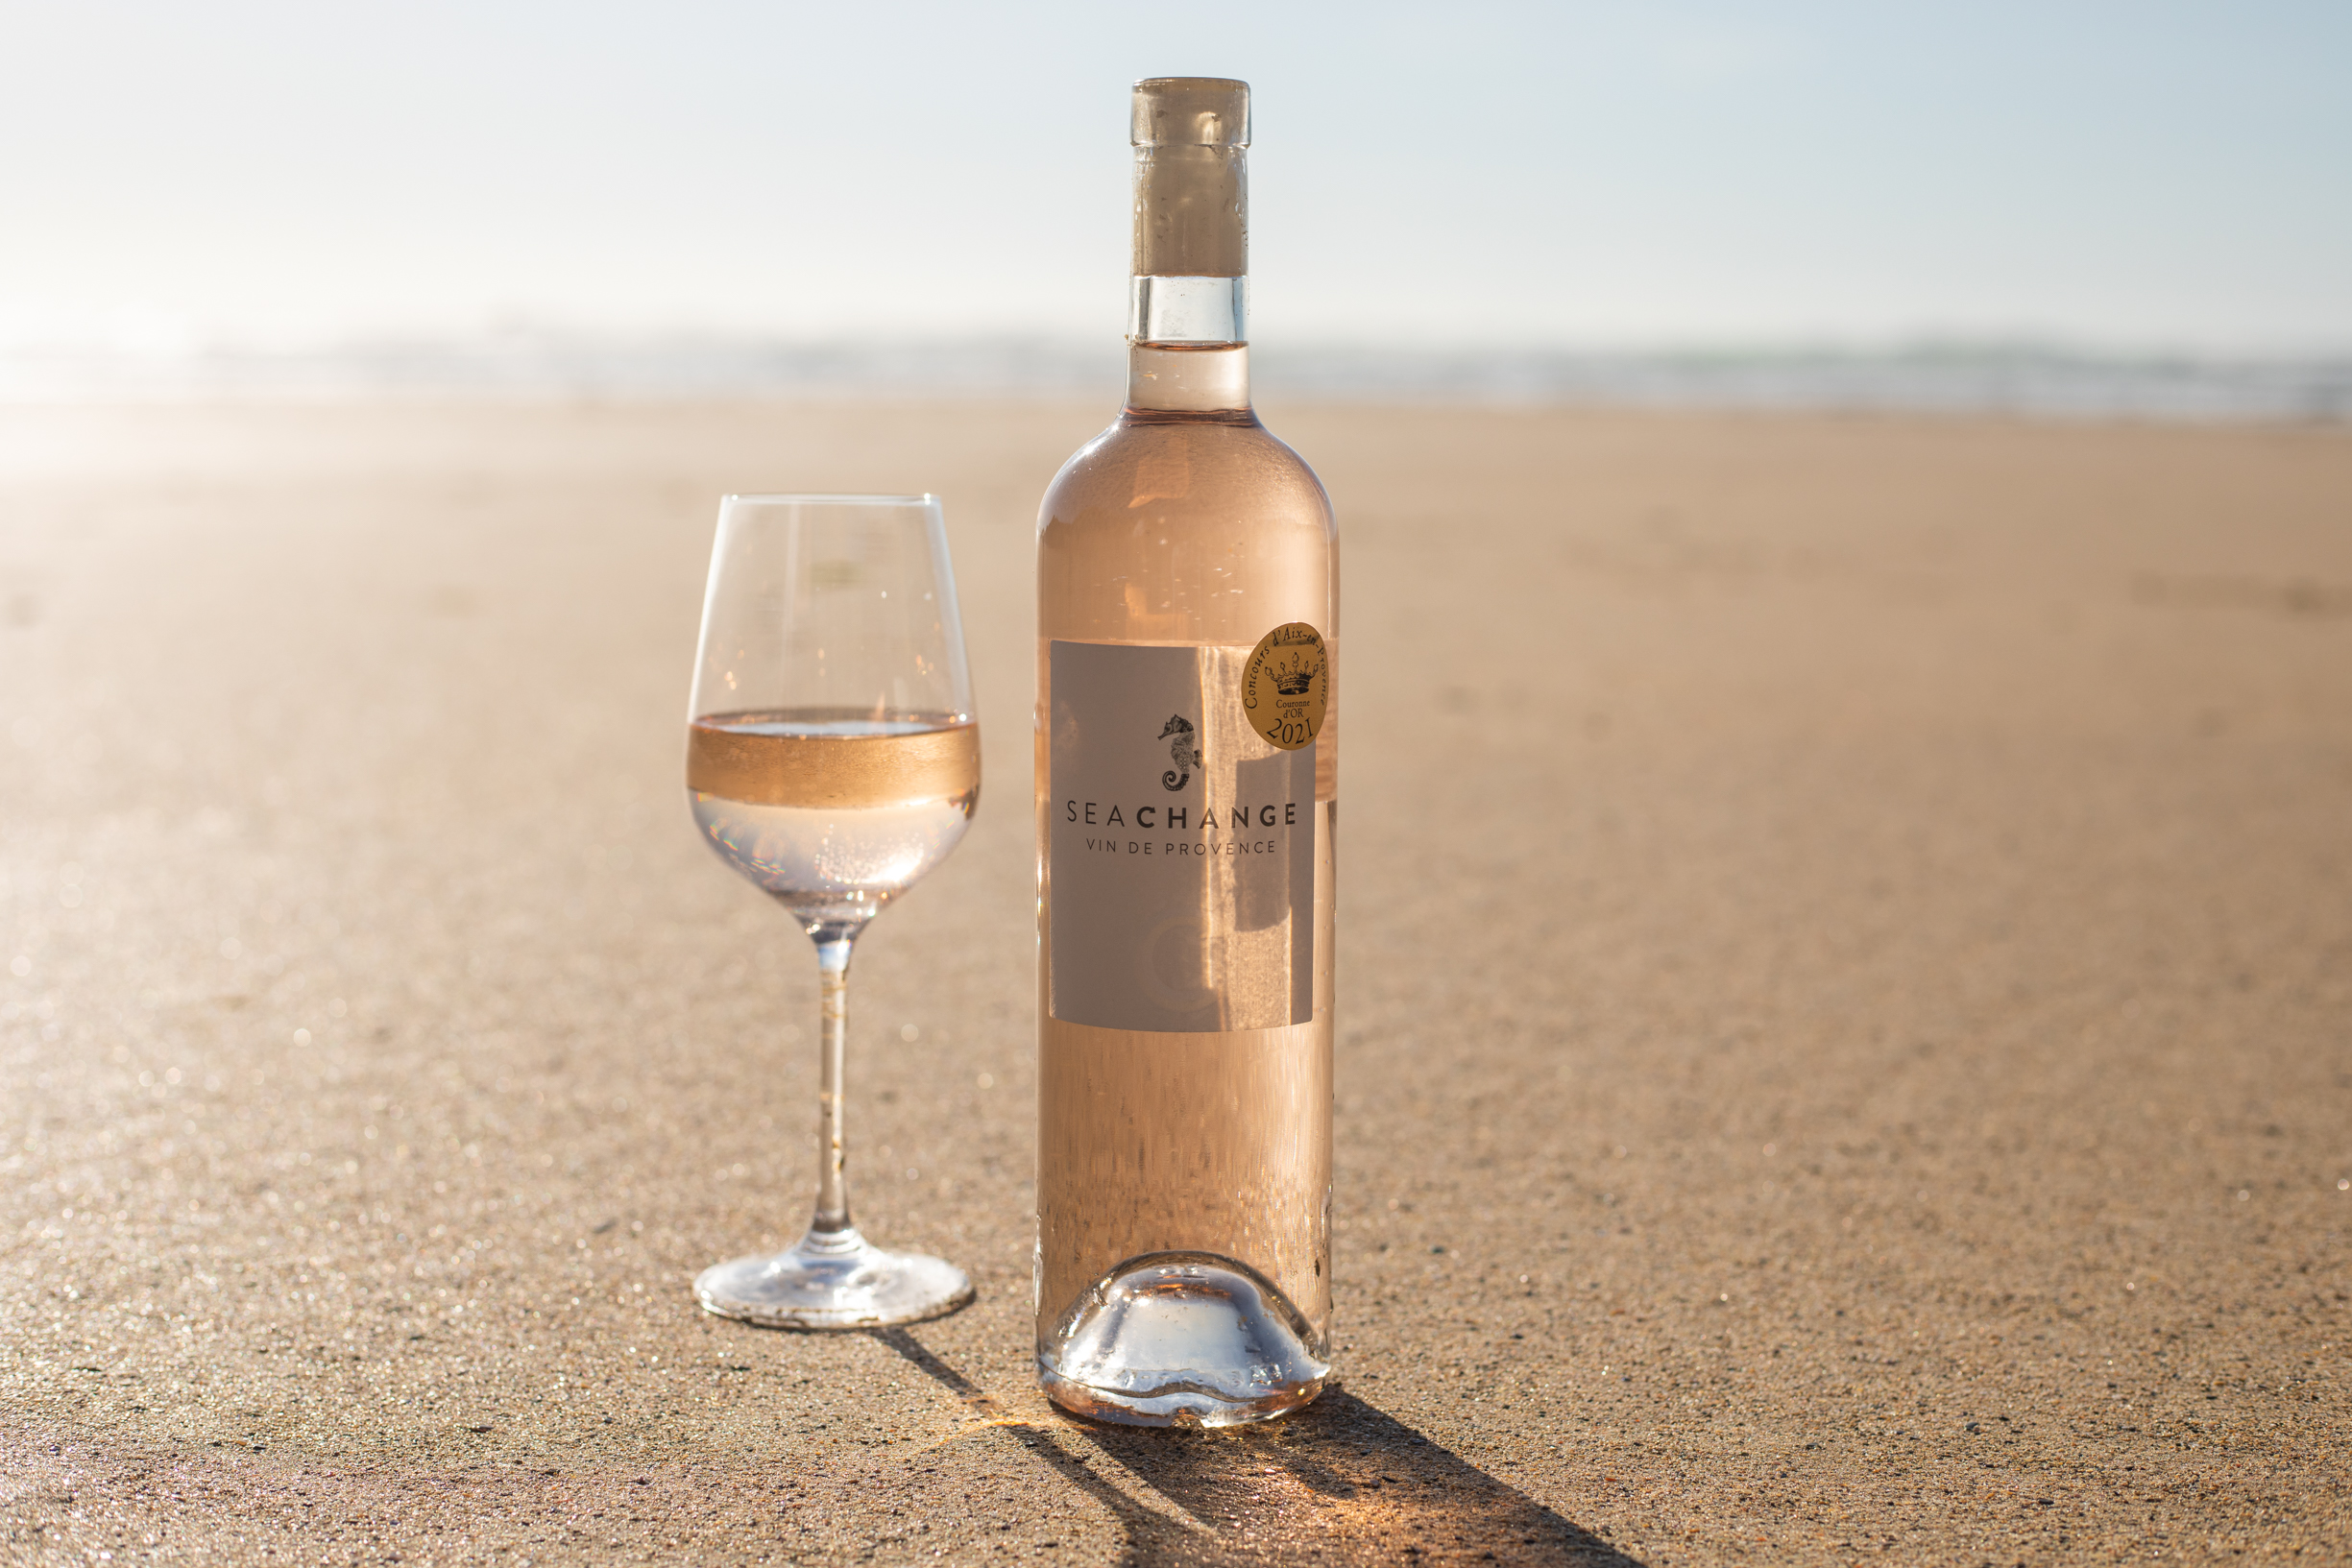 Out in the desert sand, a bottle of Sea Change rosé with a glass next to it.